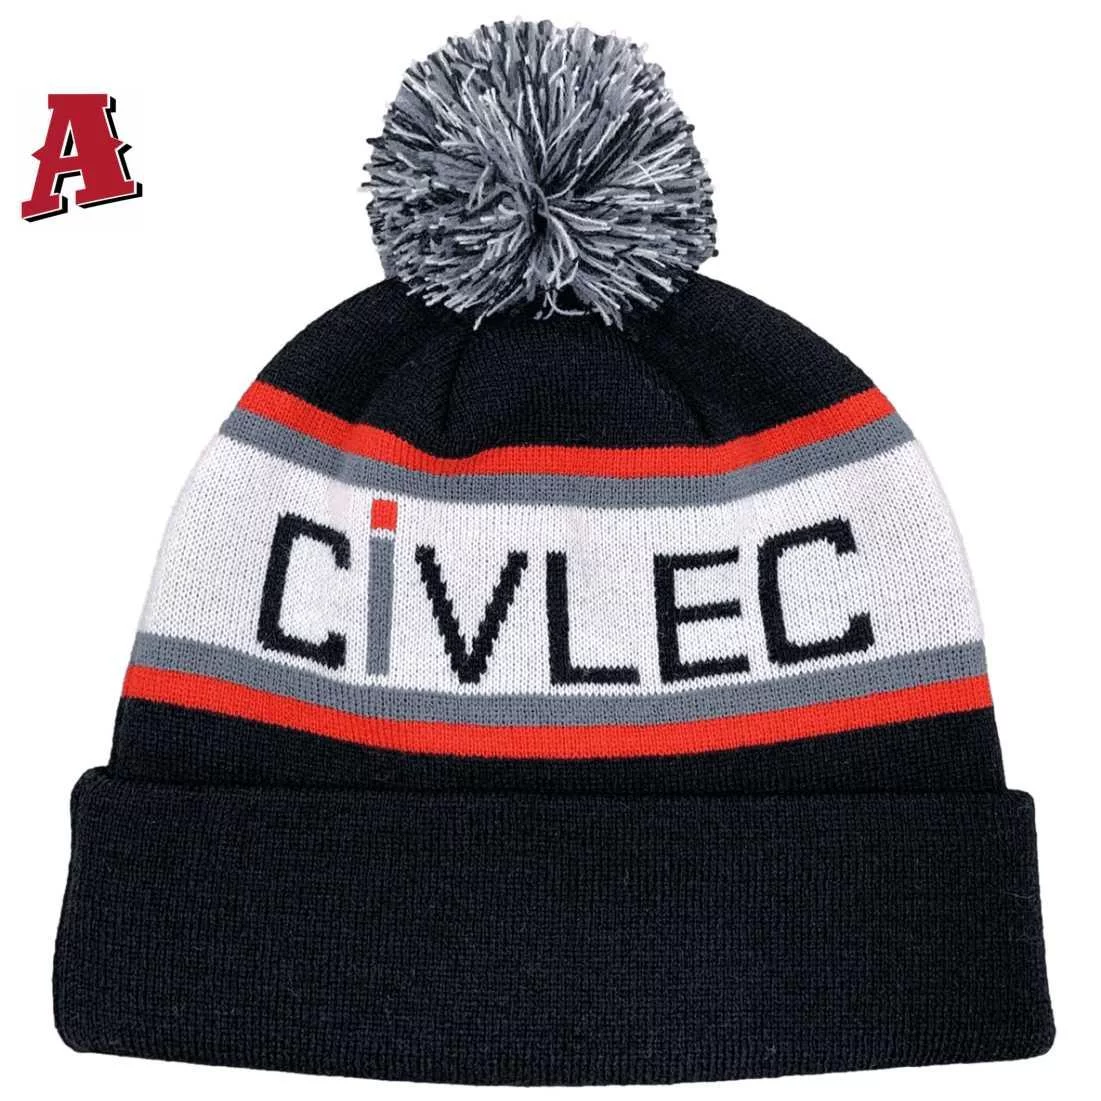 Civlec Constructions Pakenham Vic Aussie Acrylic Custom Beanie with Pom Pom and Rolled Smooth Cuff Black Red Grey White